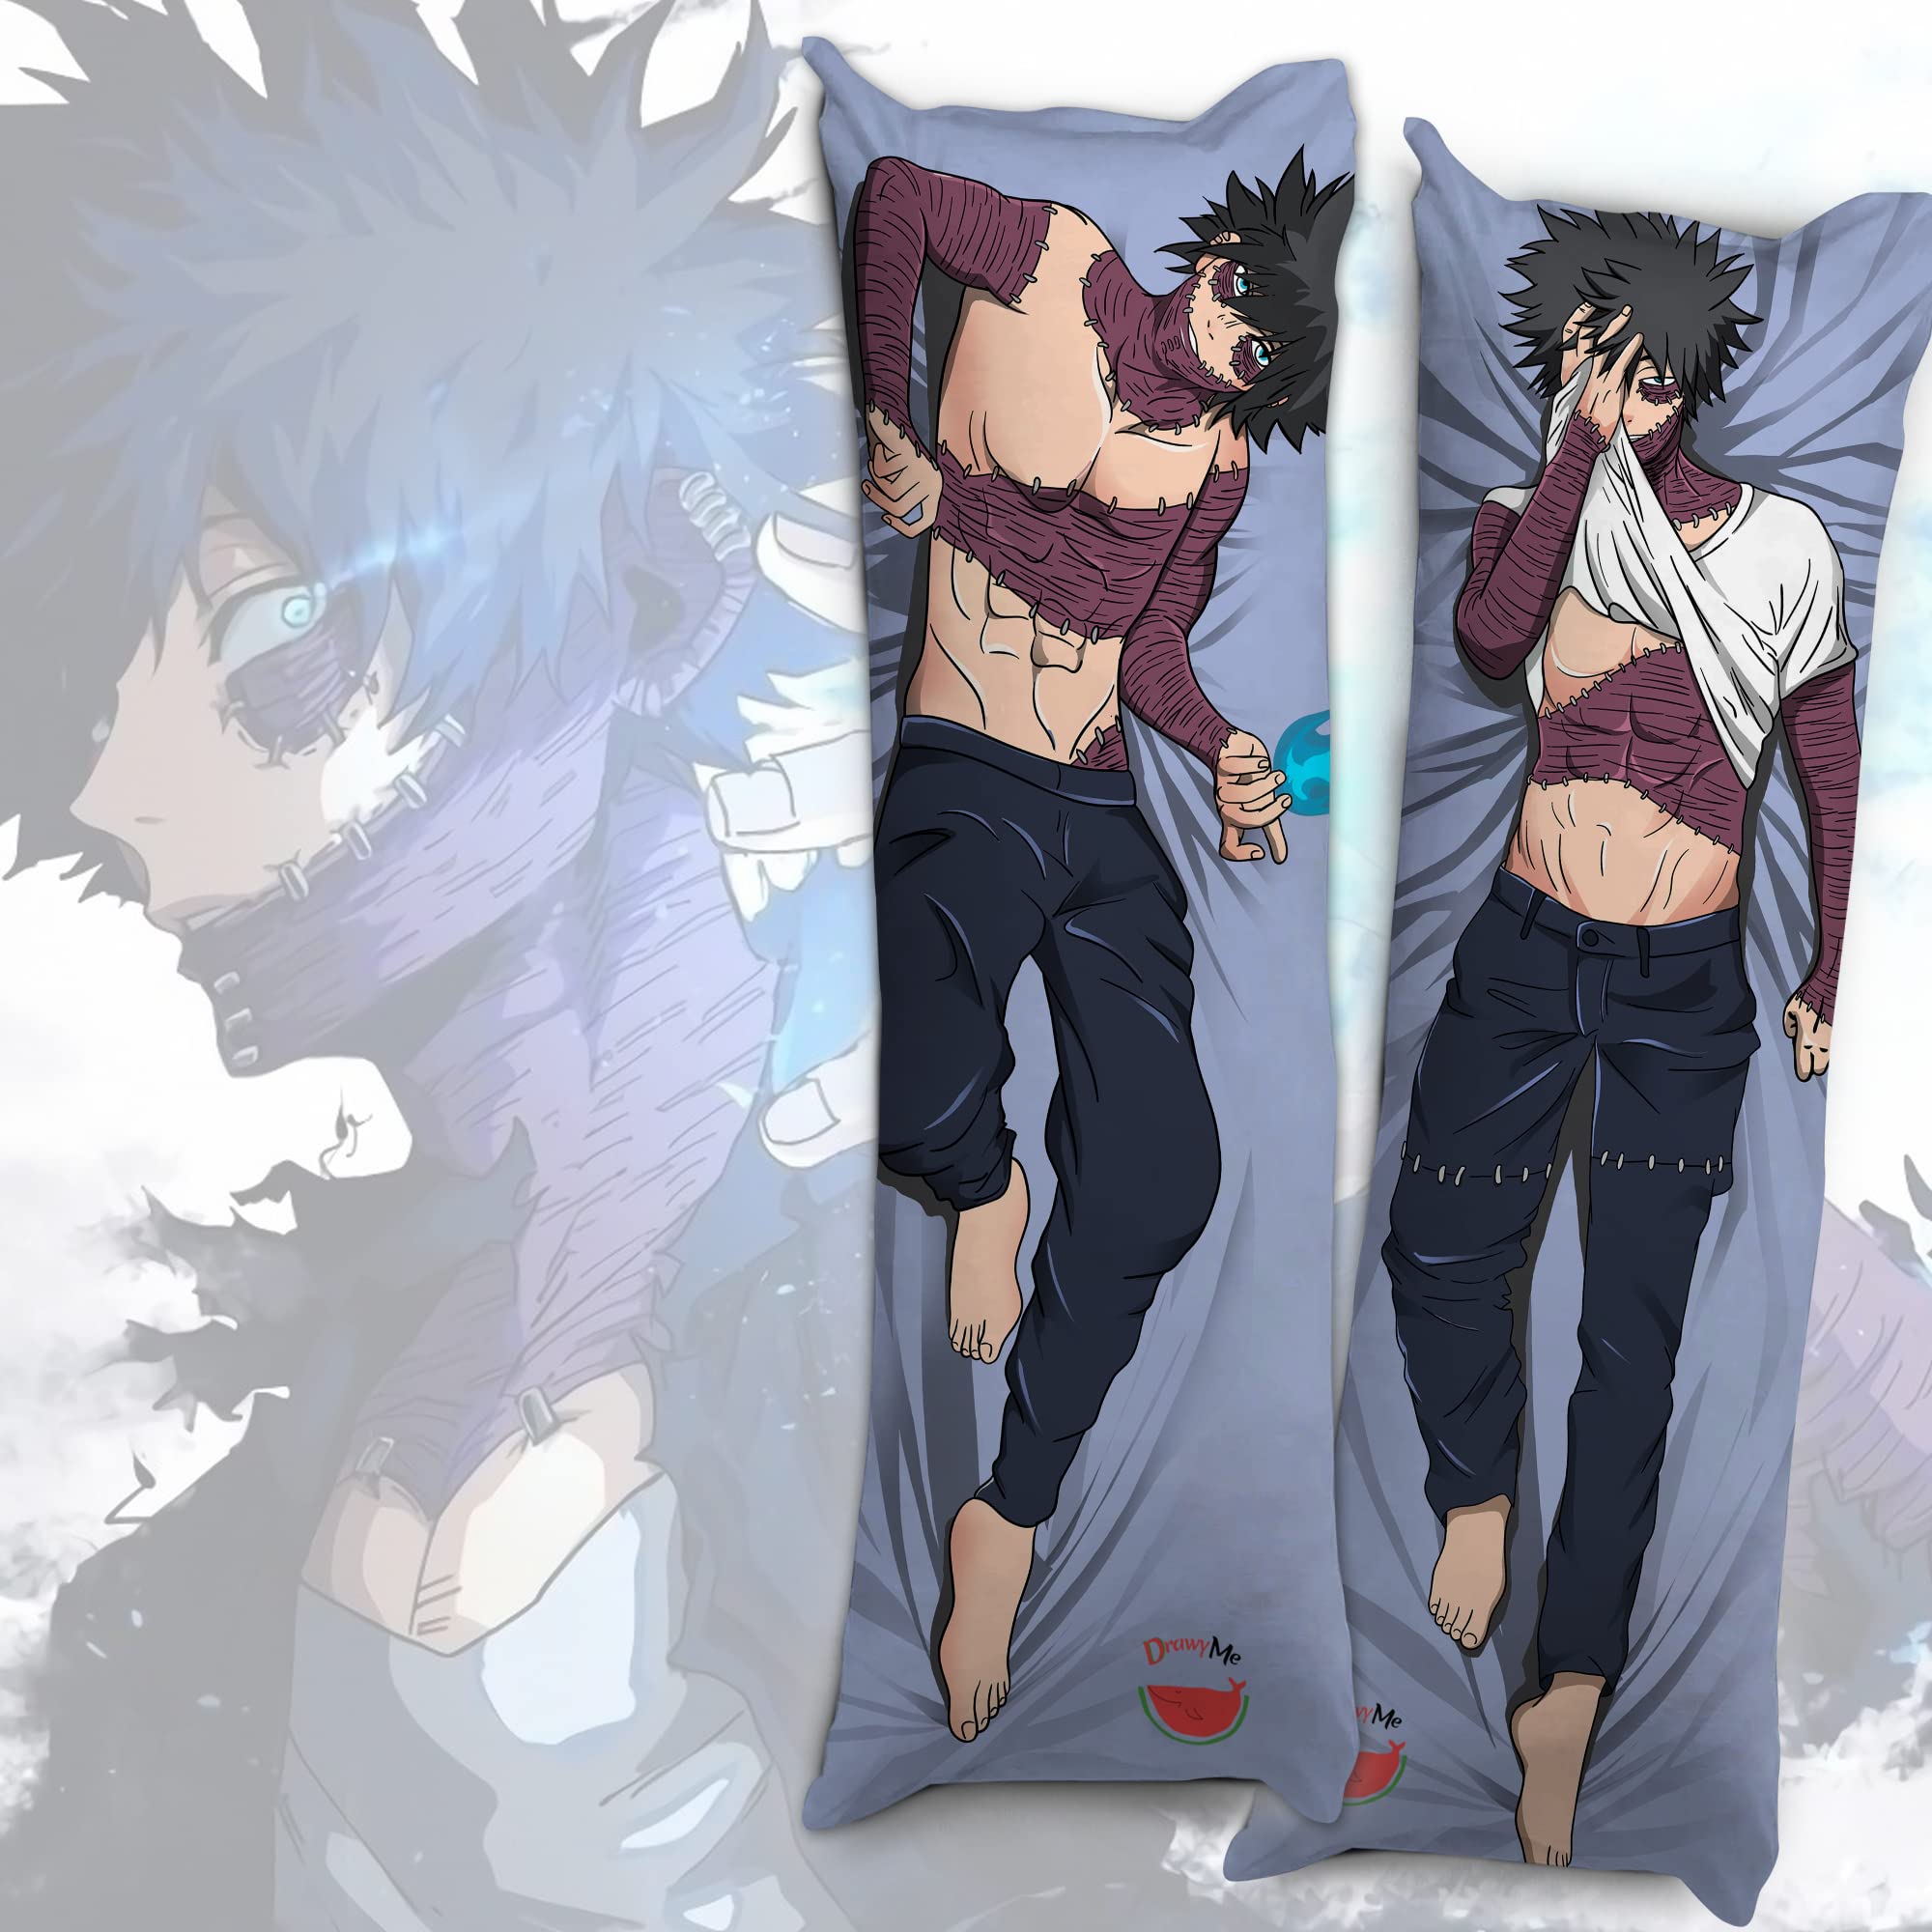 Amazon.com: Kujou Sara Suletta Mercury Body Pillow Anime Pillow Cover Anime  Girl Body Pillowcase Hugging Pillows Soft Throw Pillow Cover Double-Sided  Printed Plush Room Decor 59in x 19in : Home & Kitchen